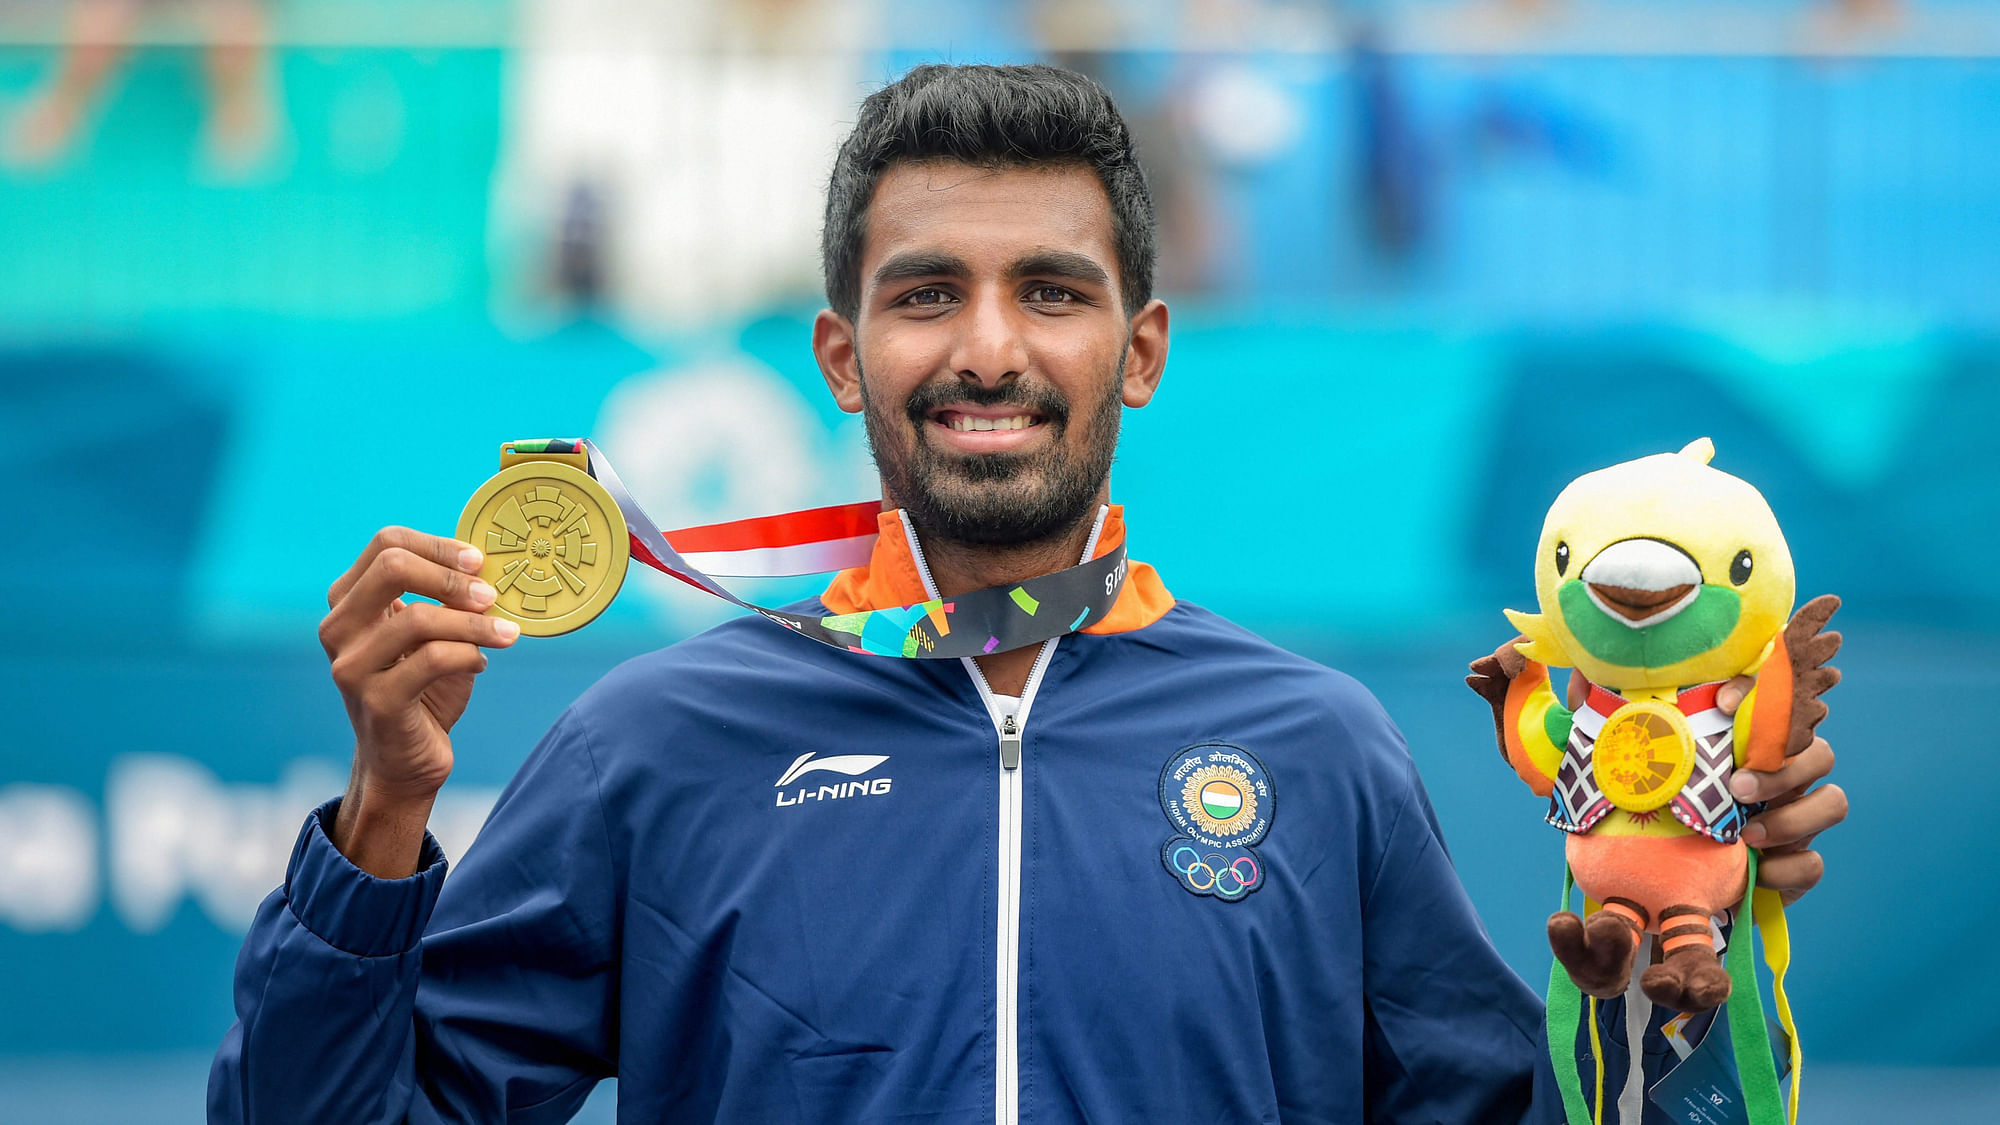 Prajnesh Gunneswaran poses with his bronze medal during the medal ceremony for the men’s singles tennis event at the 18th Asian Games 2018.